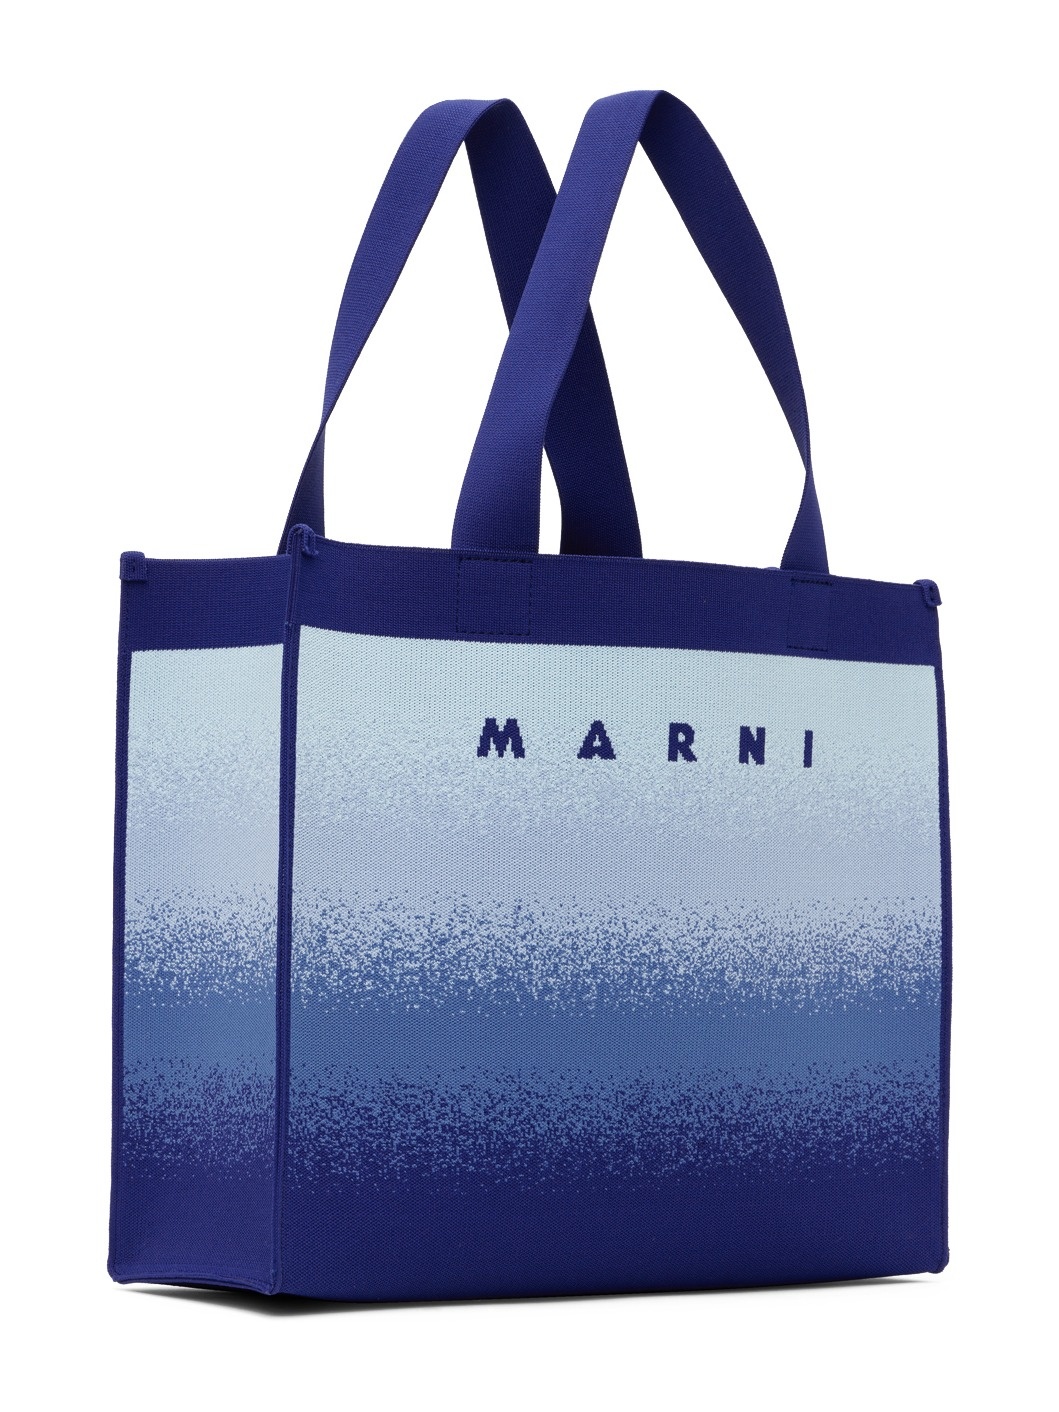 Blue Shopping Tote - 3